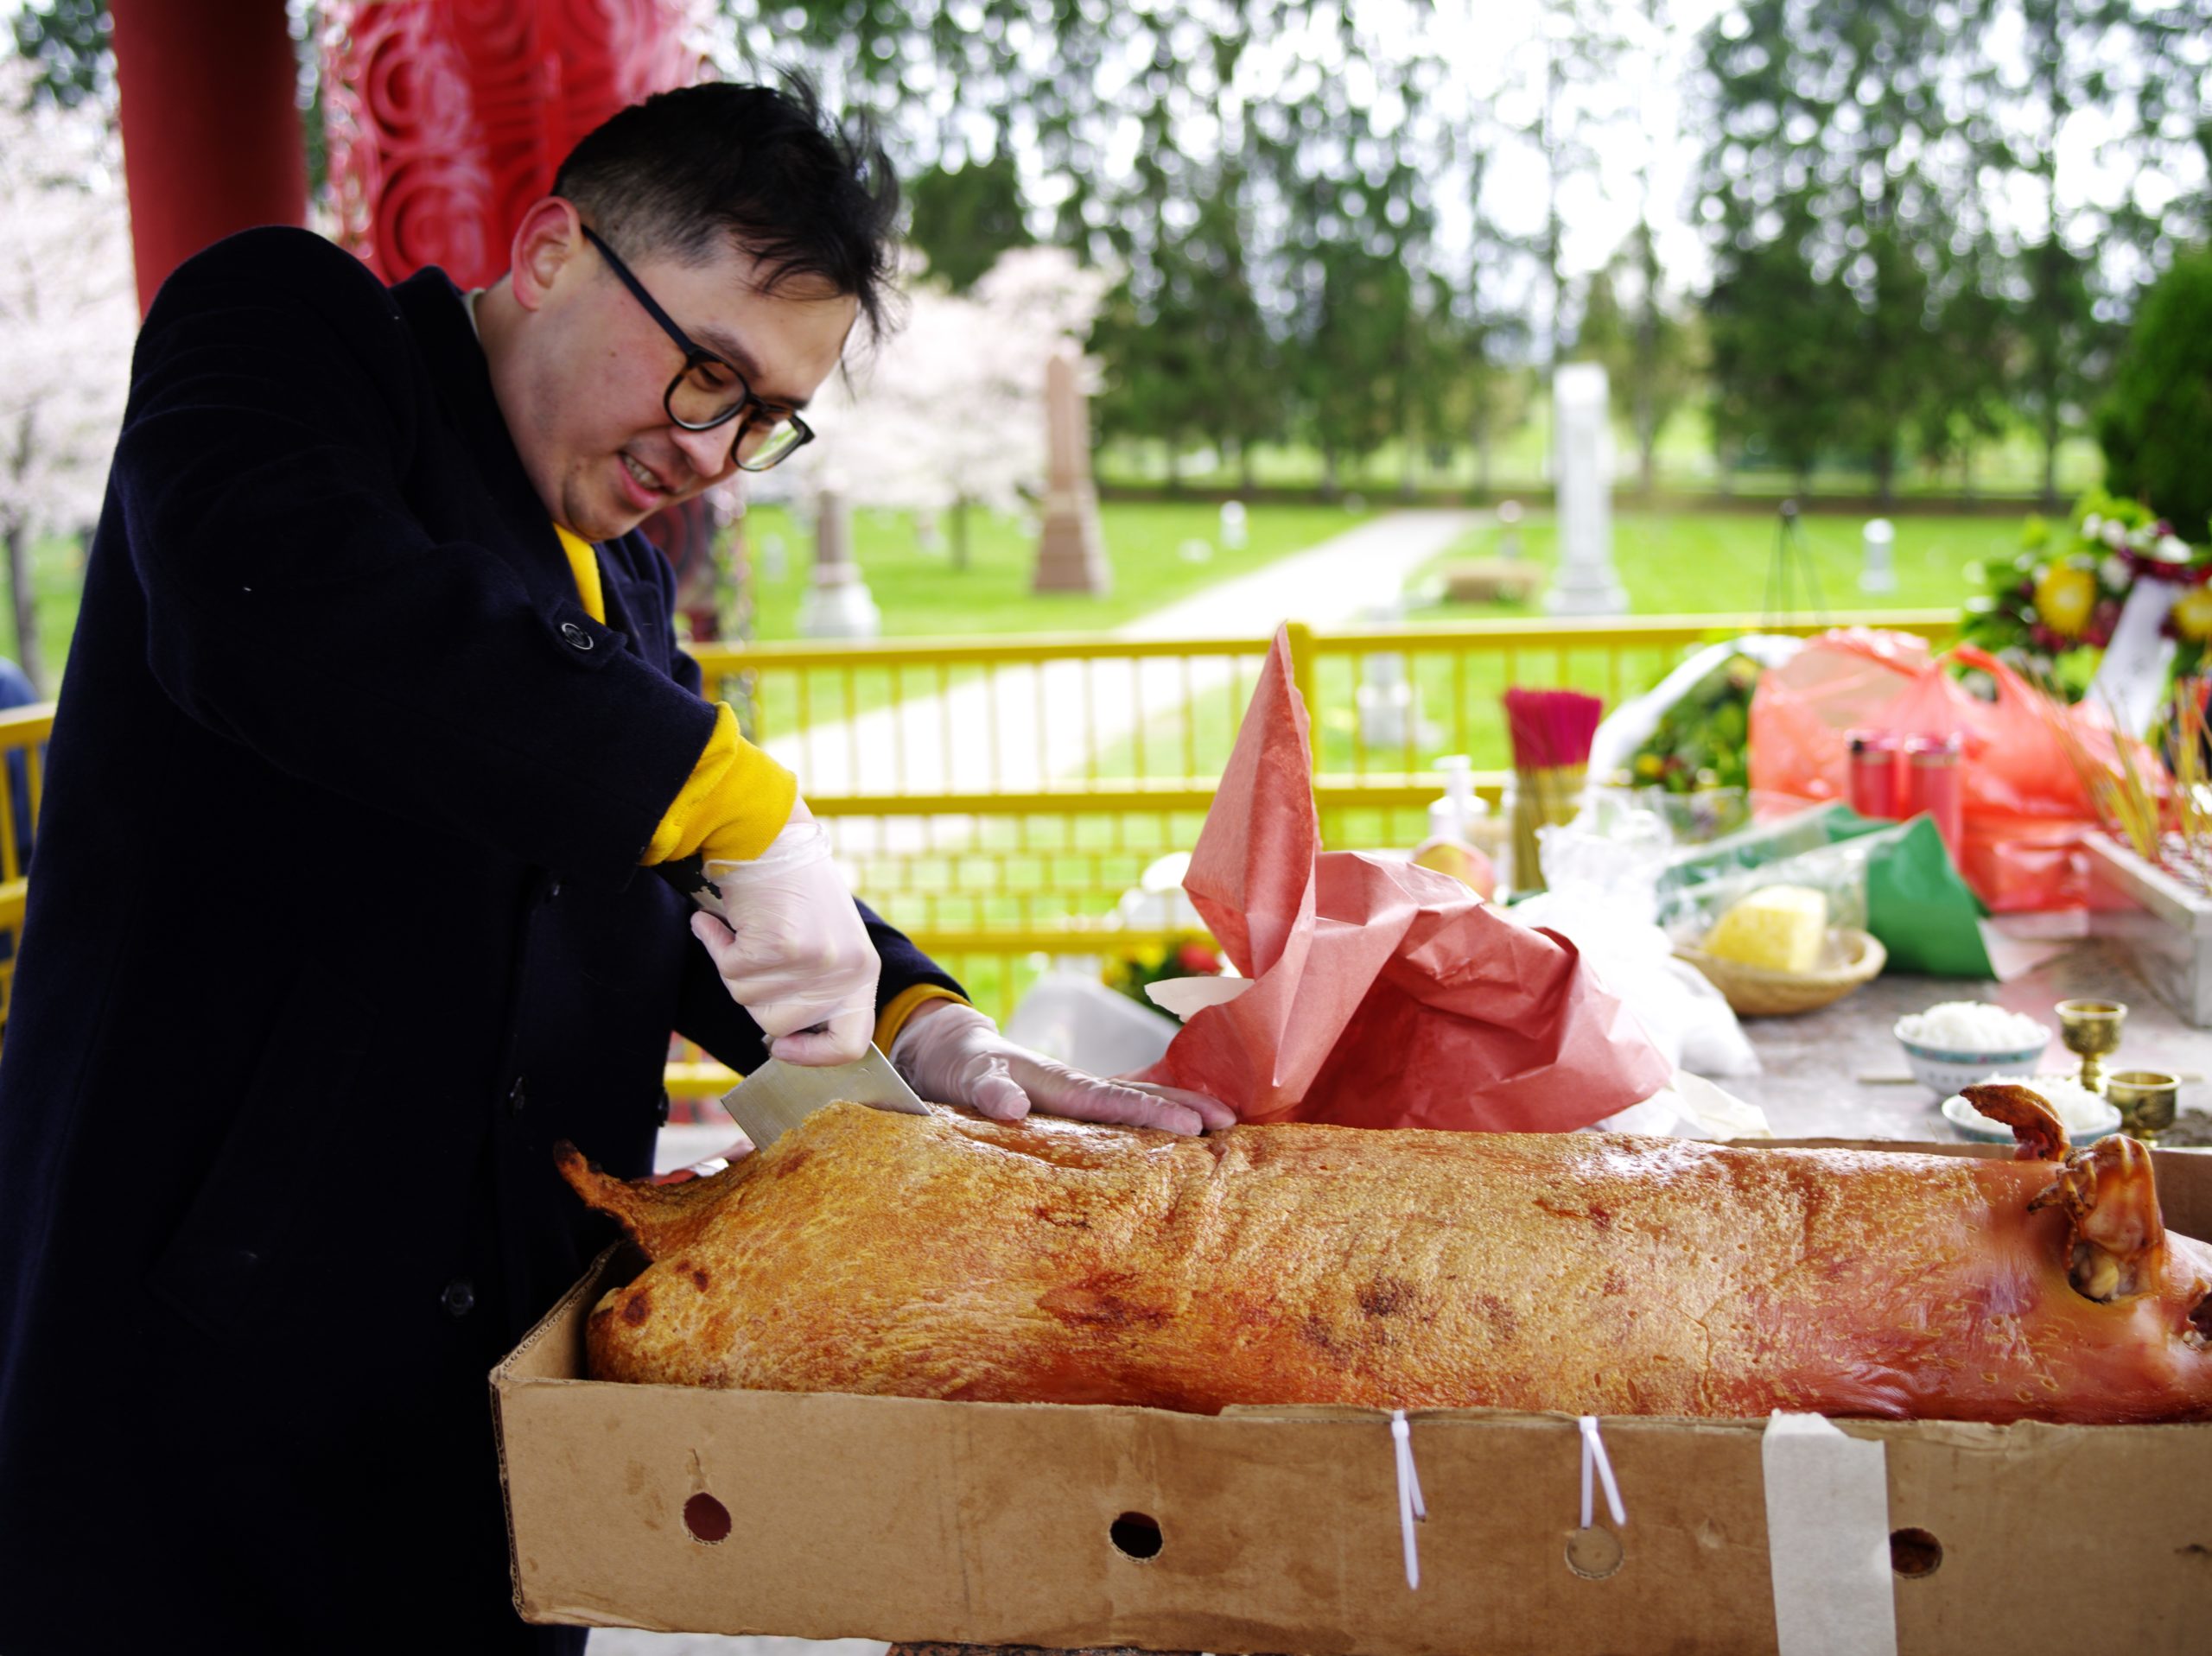 Image Description: A person stands on the left side of the photograph facing the Chinese Pavilion Altar. They have short, dark hair and dark glasses on. Their ears and lips are colored from the cold. Bright sleeves peek out beyond the cuffs of their heavy, dark winter jacket. With a large butchering knife in their right hand, they are cutting into a cooked roast pig. Desserts, rice, fruit, incense, and flowers are blurred out in the back of the photograph.